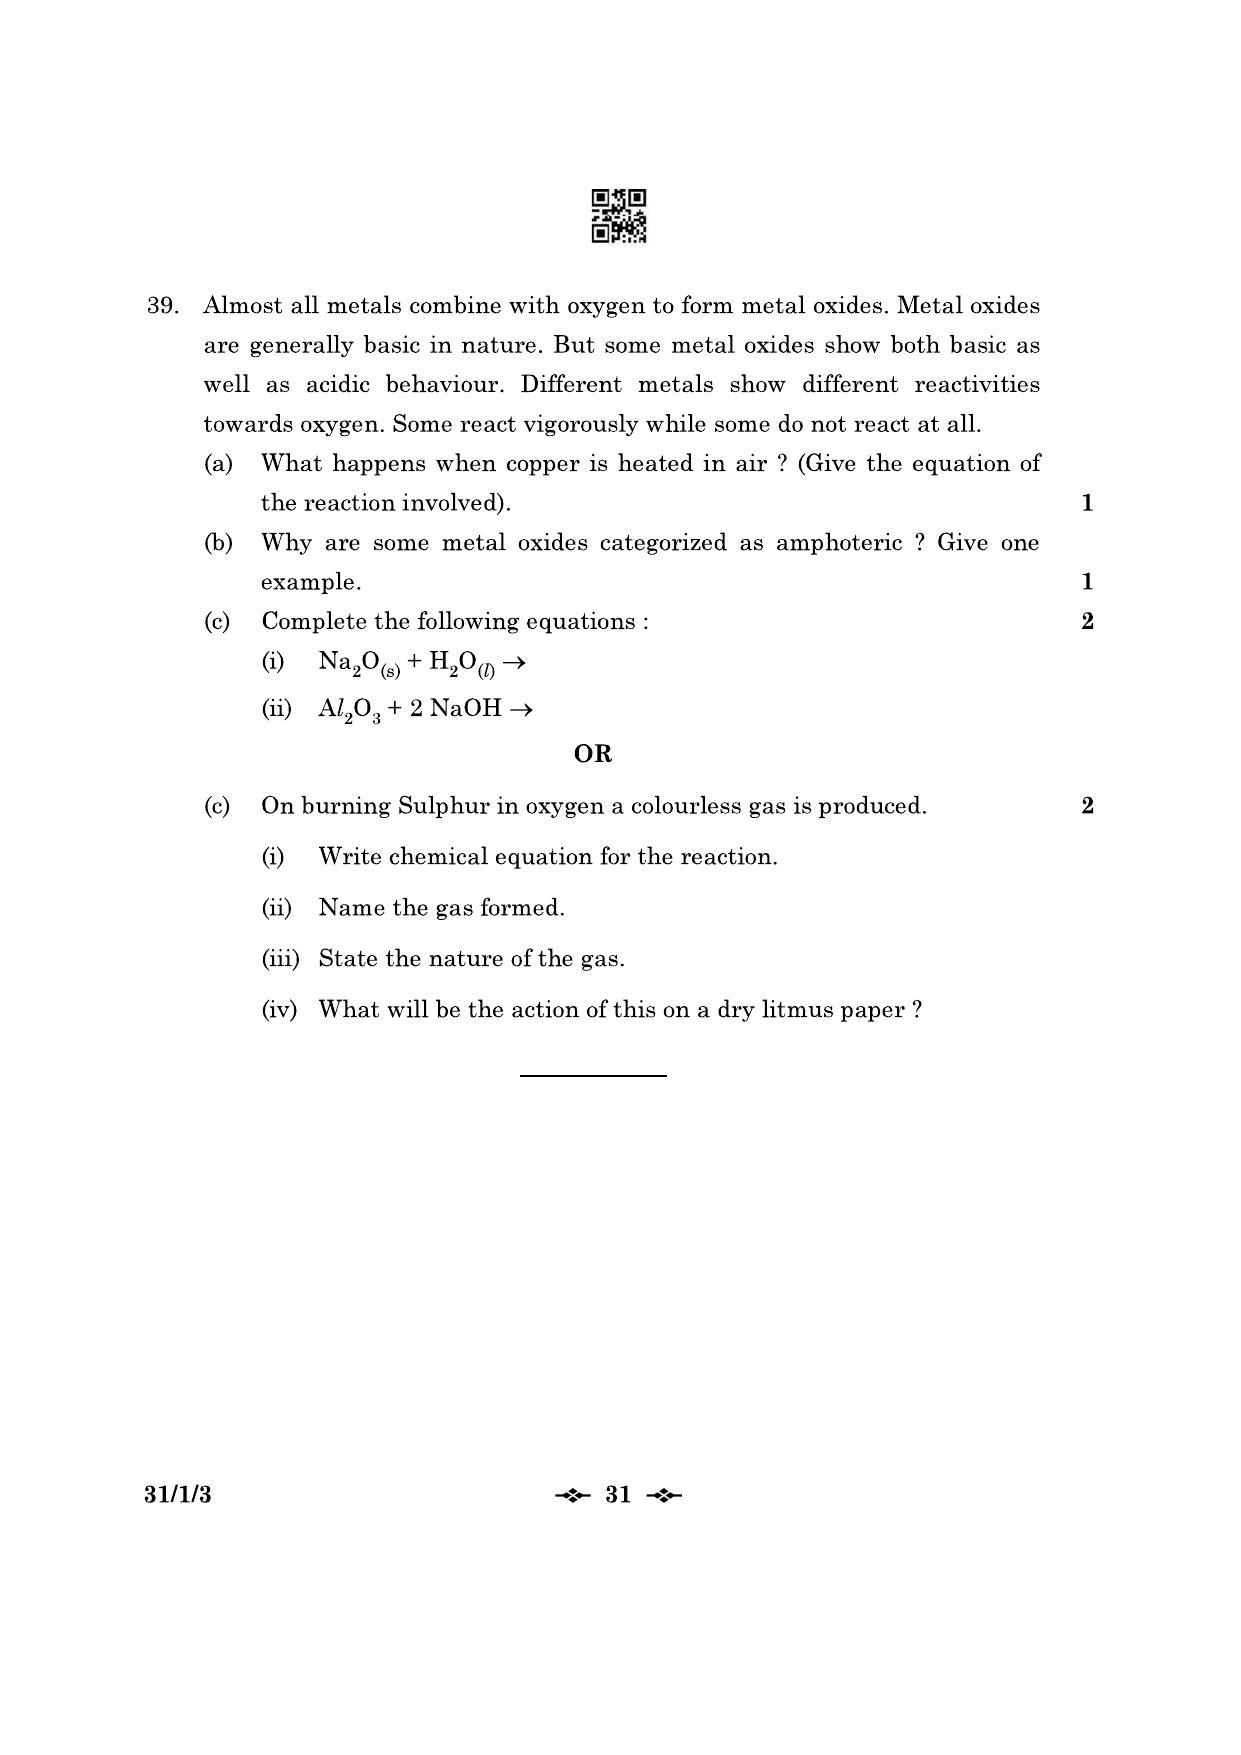 CBSE Class 10 31-1-3 Science 2023 Question Paper - Page 31